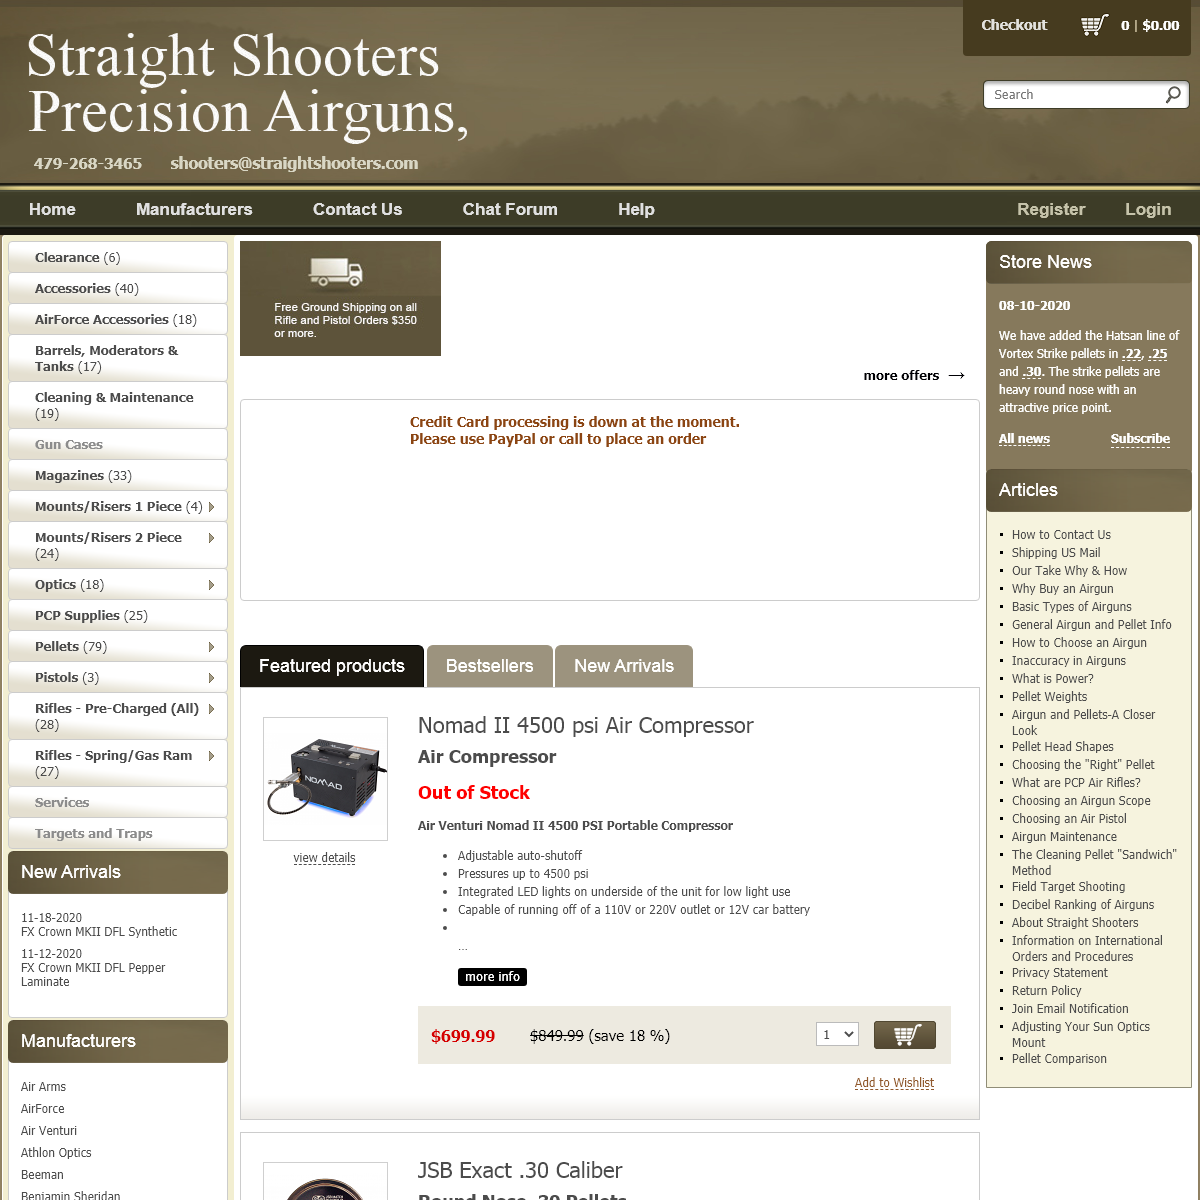 A complete backup of straightshooters.com